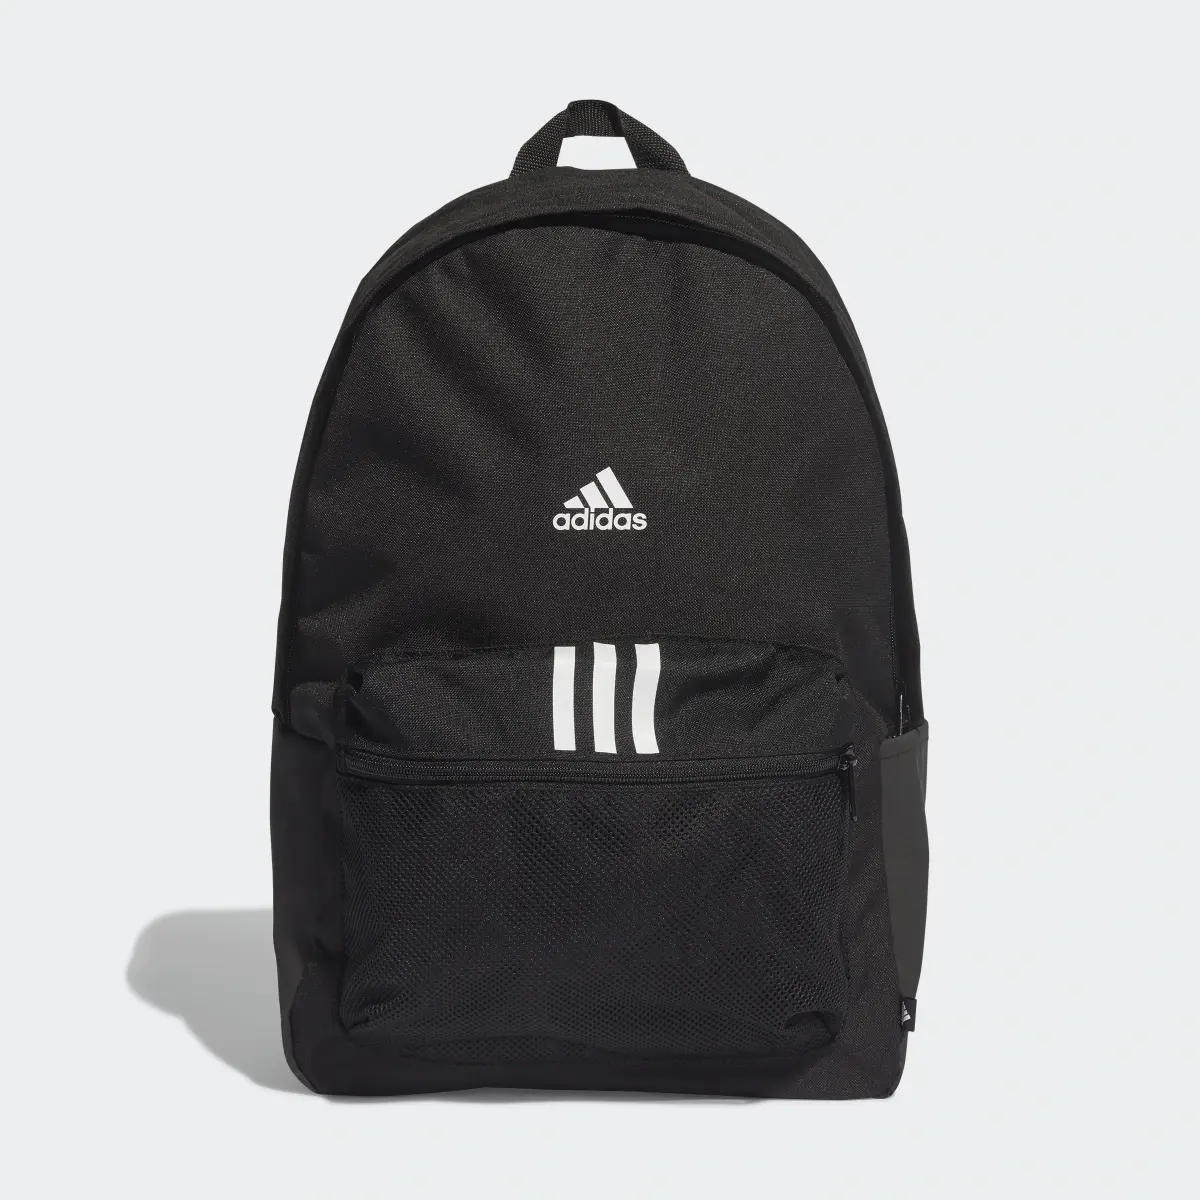 Adidas Classic Badge of Sport 3-Stripes Backpack. 2